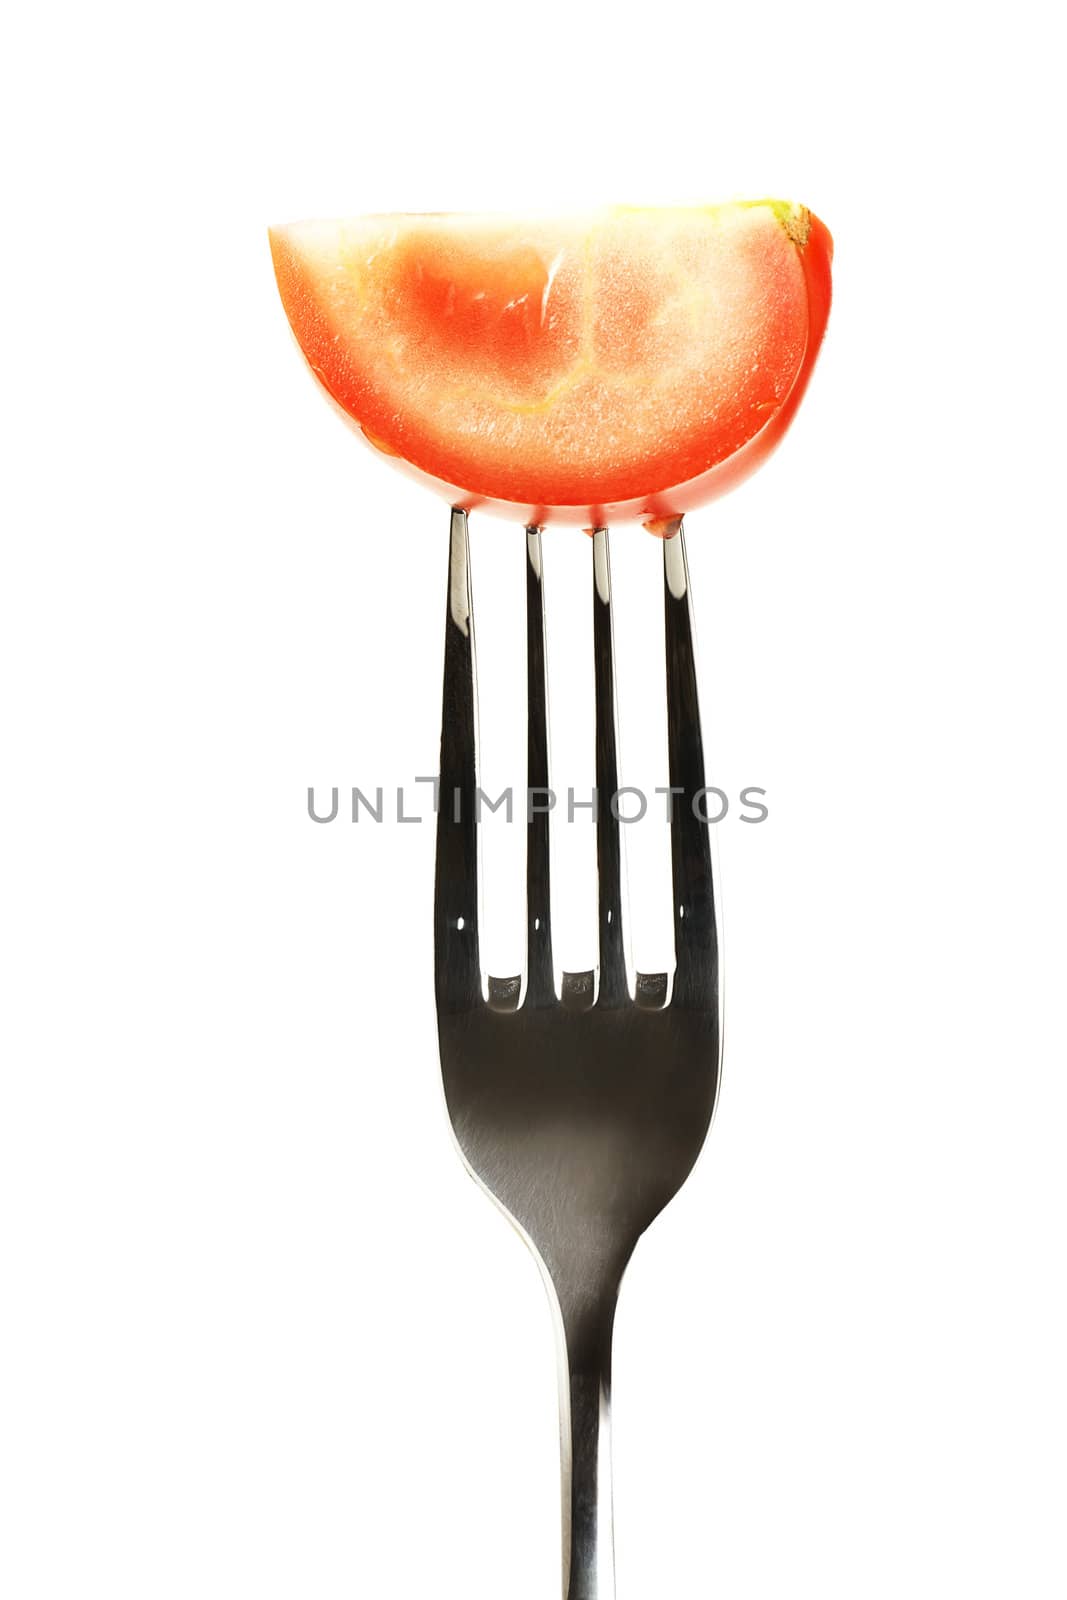 one tomato on a fork on white background